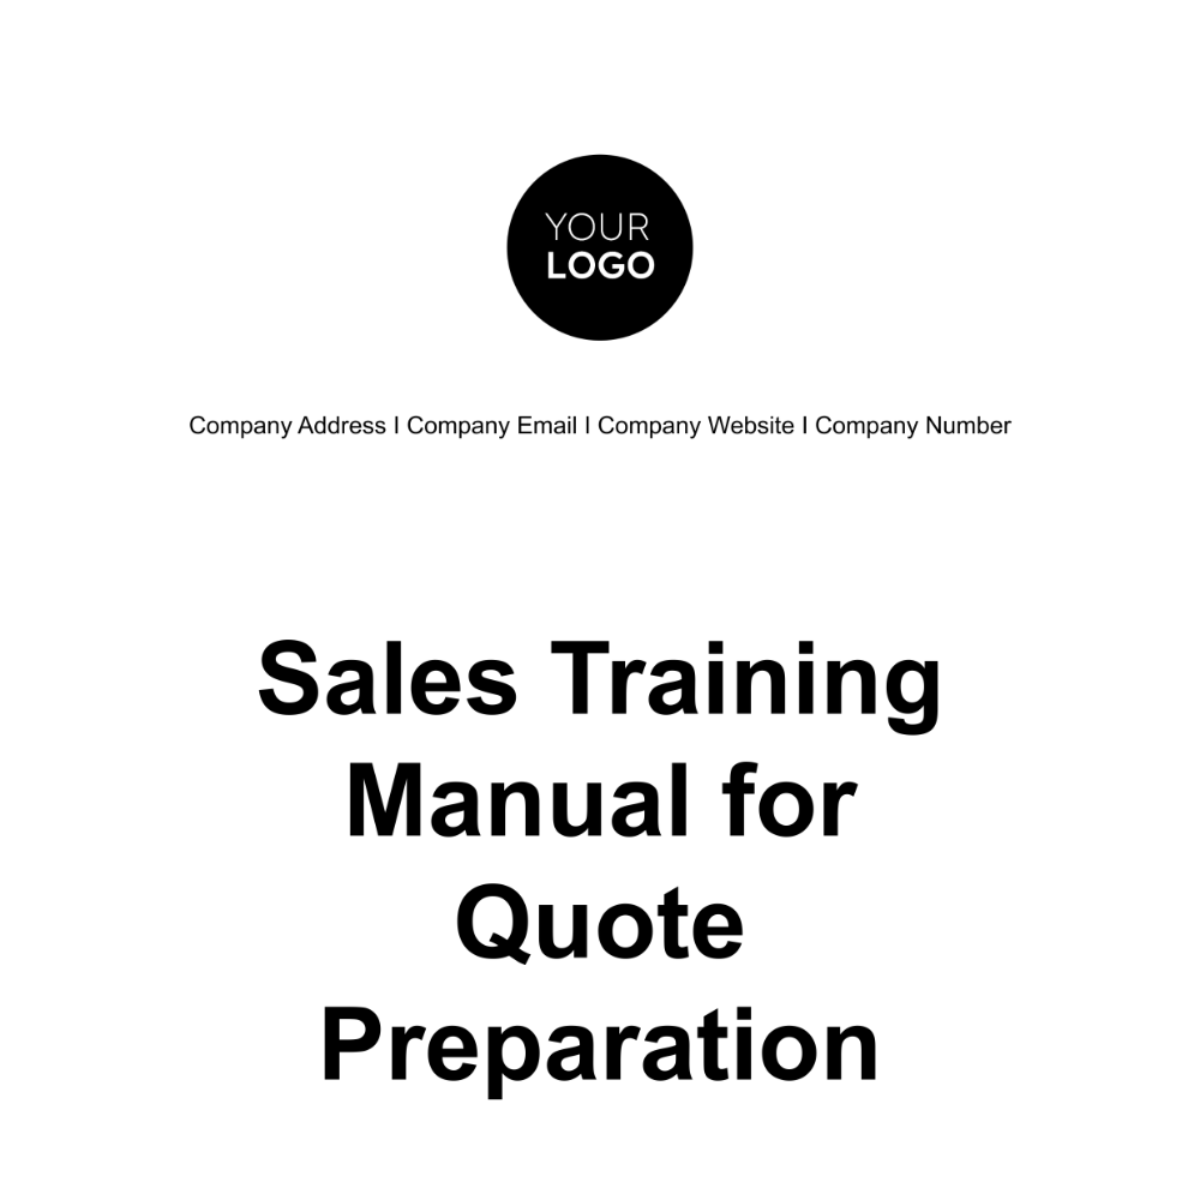 Sales Training Manual for Quote Preparation Template